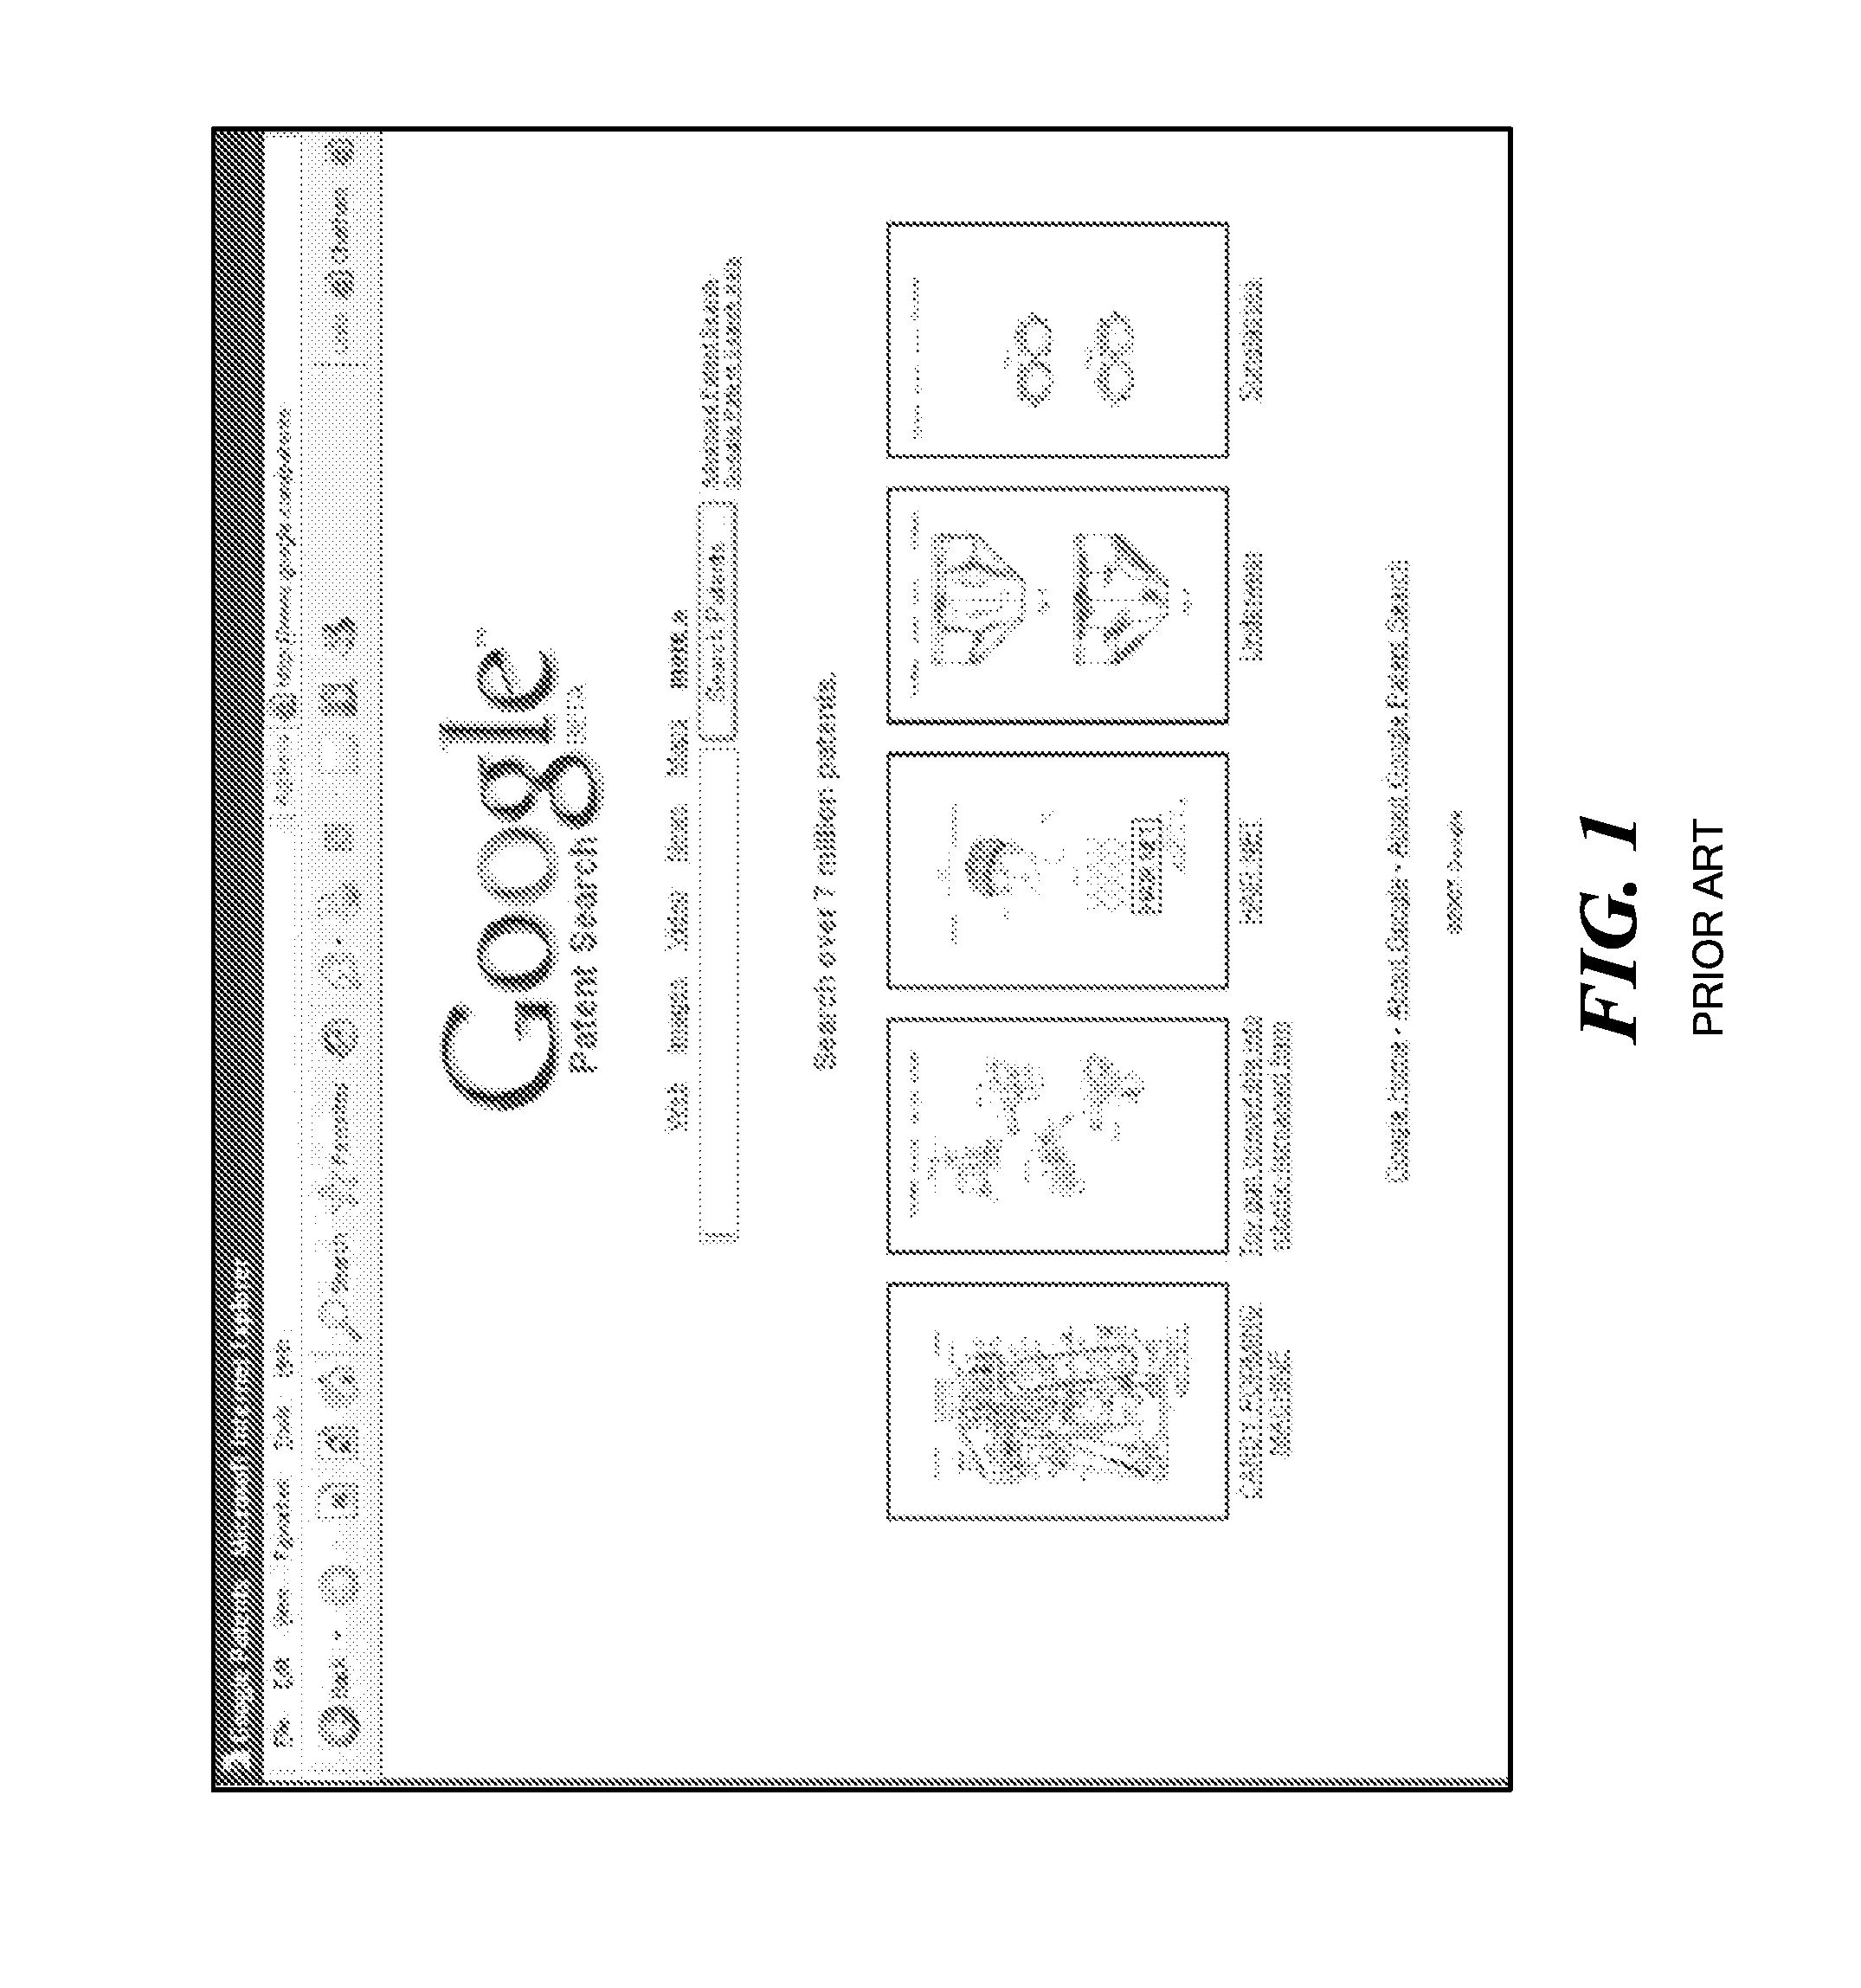 Apparatus and method for performing analyses on data derived from a web-based search engine